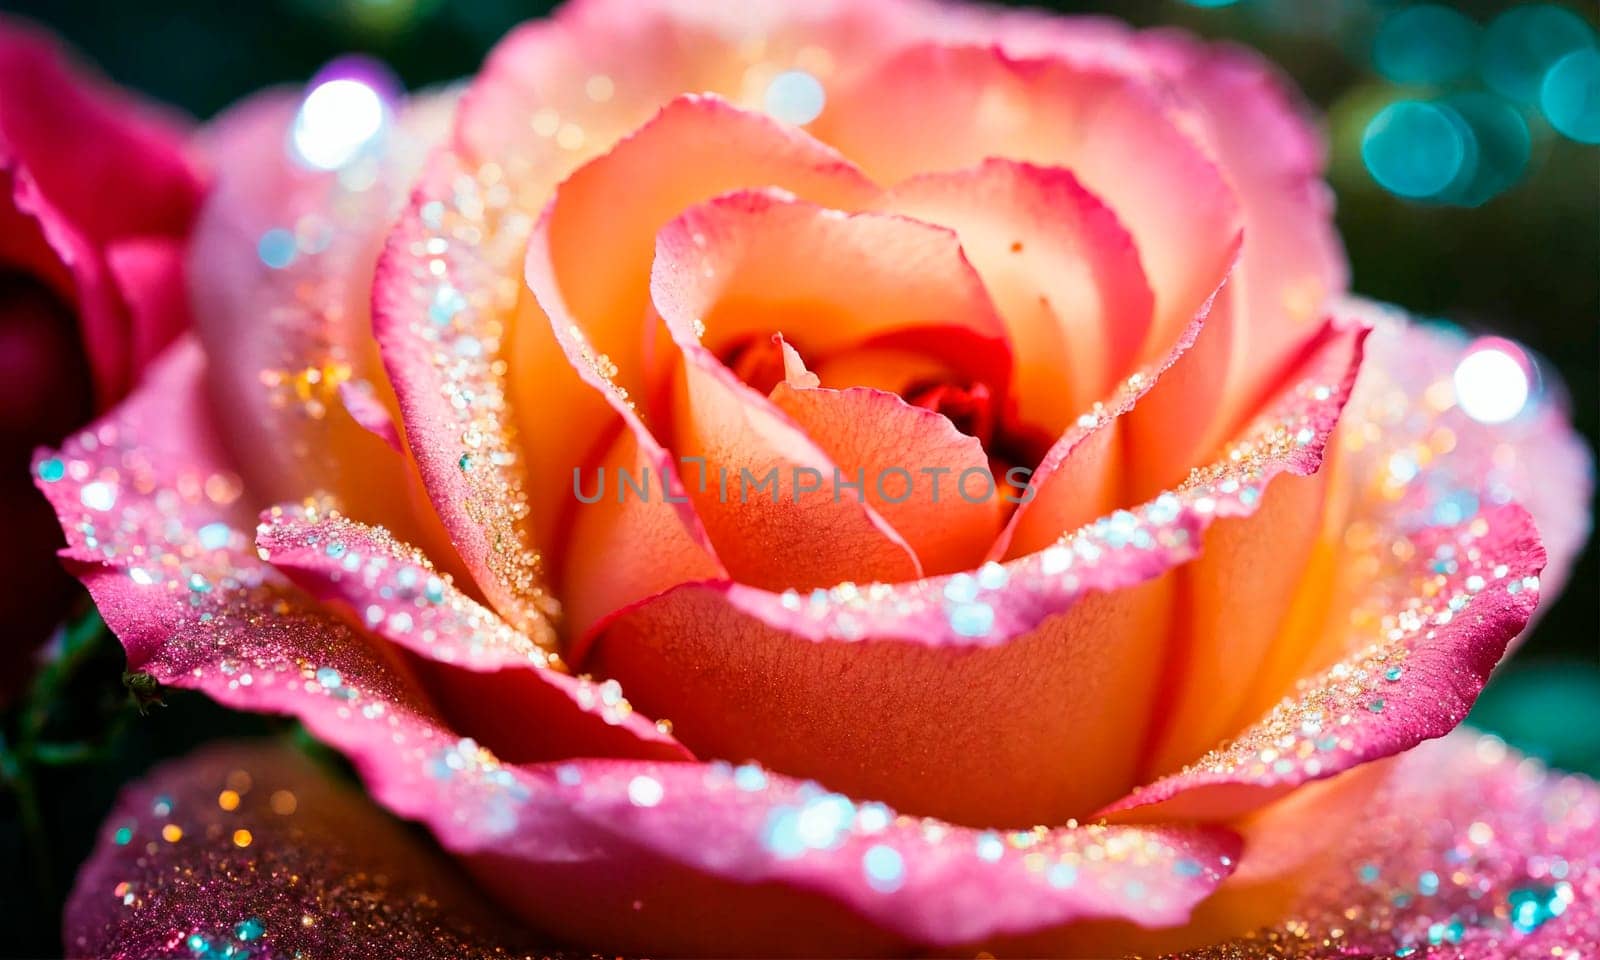 glowing beautiful rose on a shining background. Selective focus. nature.